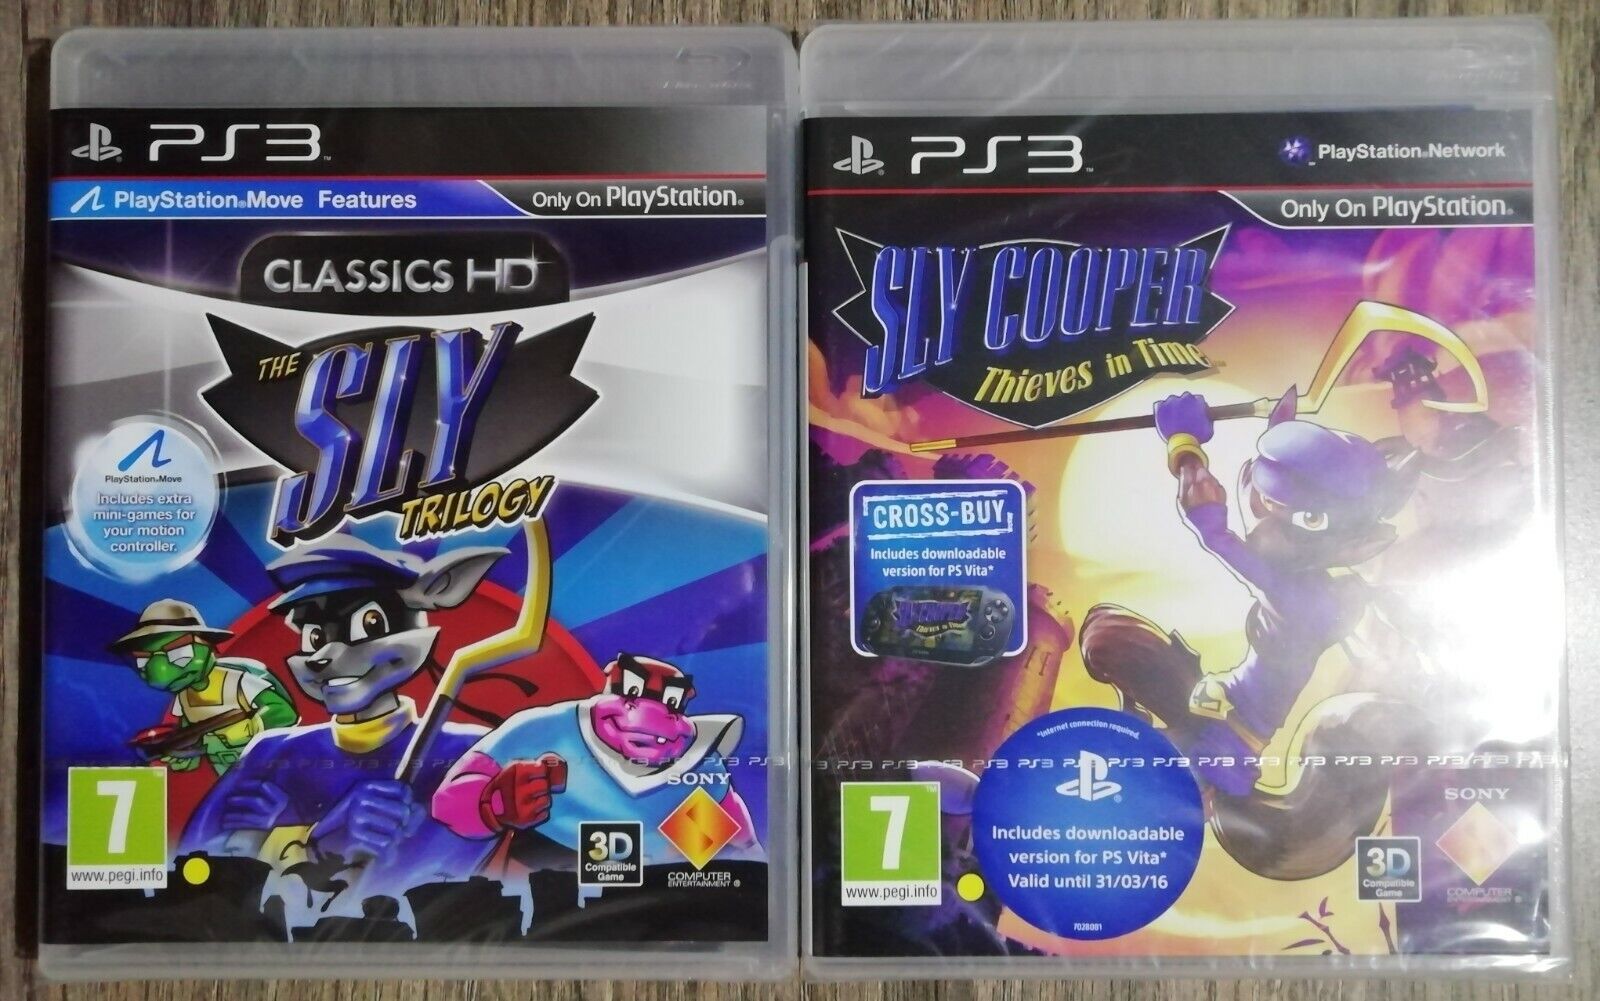 Sly ps3. Sly Cooper ps3. Sly Cooper Trilogy ps3 ISO. Sly Cooper Thieves in time ps3. The Sly Trilogy ps3.